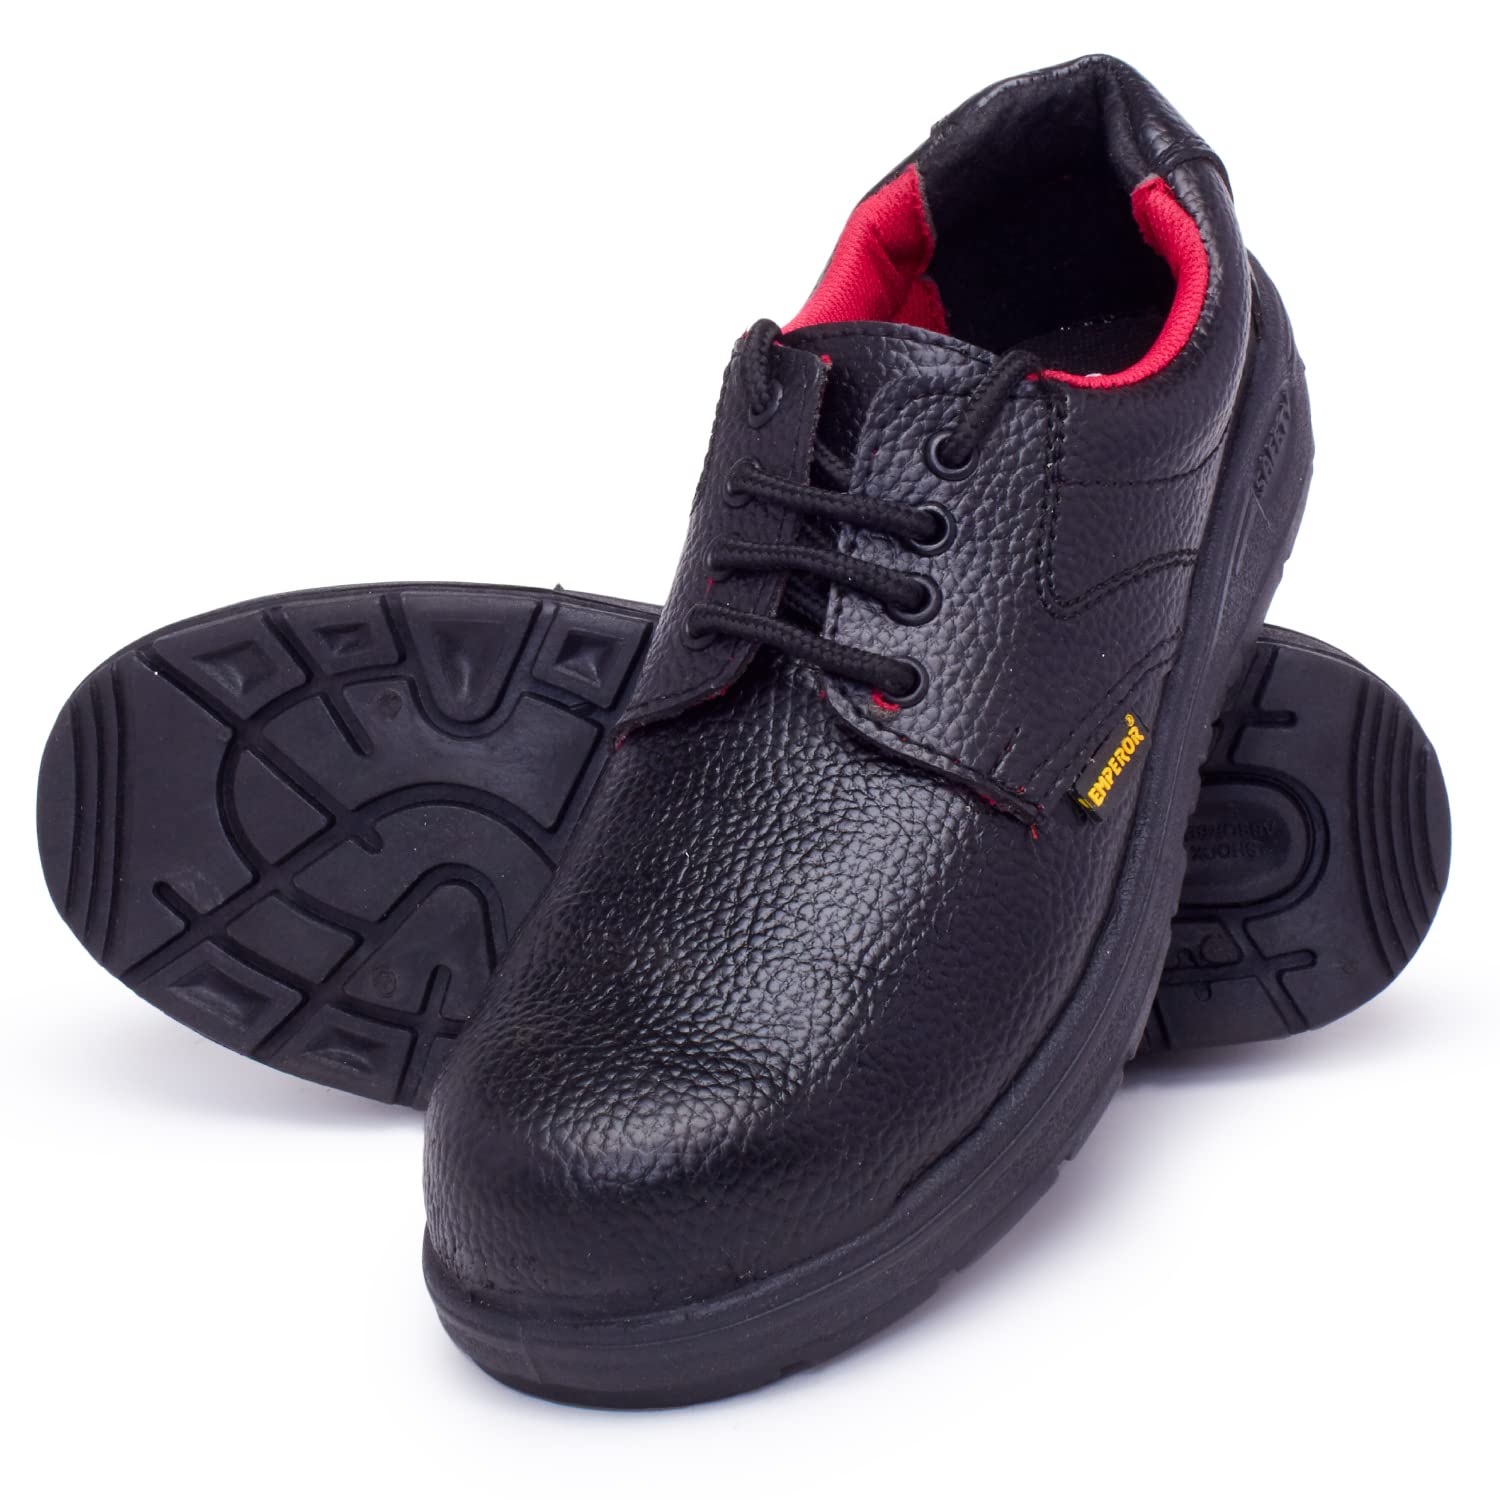 Emperor Steel Toe Leather Safety Shoe ACE